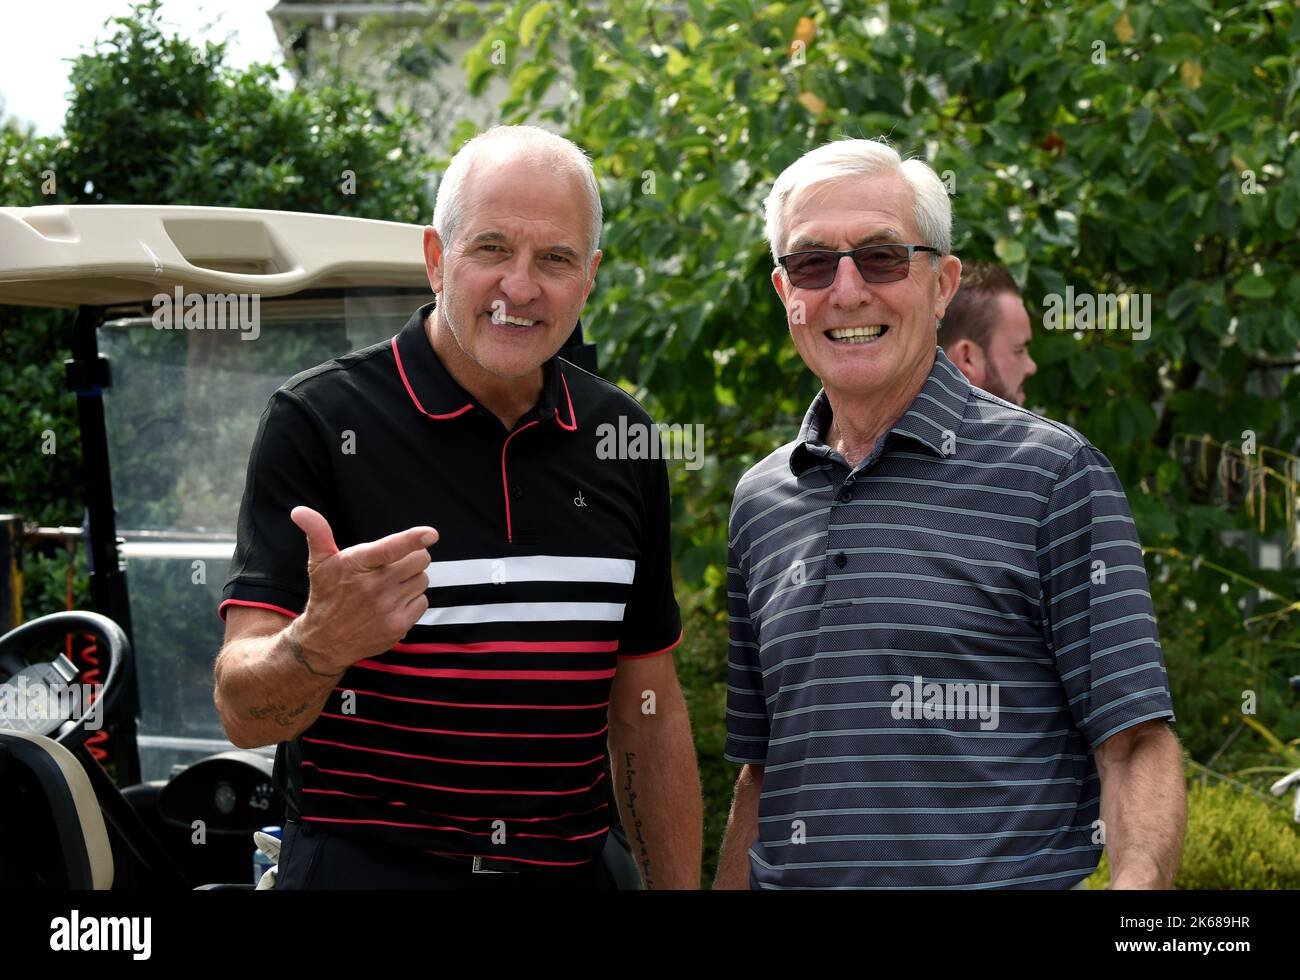 Former Wolverhampton Wanderers footballers Steve Bull and John Richards on golf day. Picture by Dave Bagnall Stock Photo